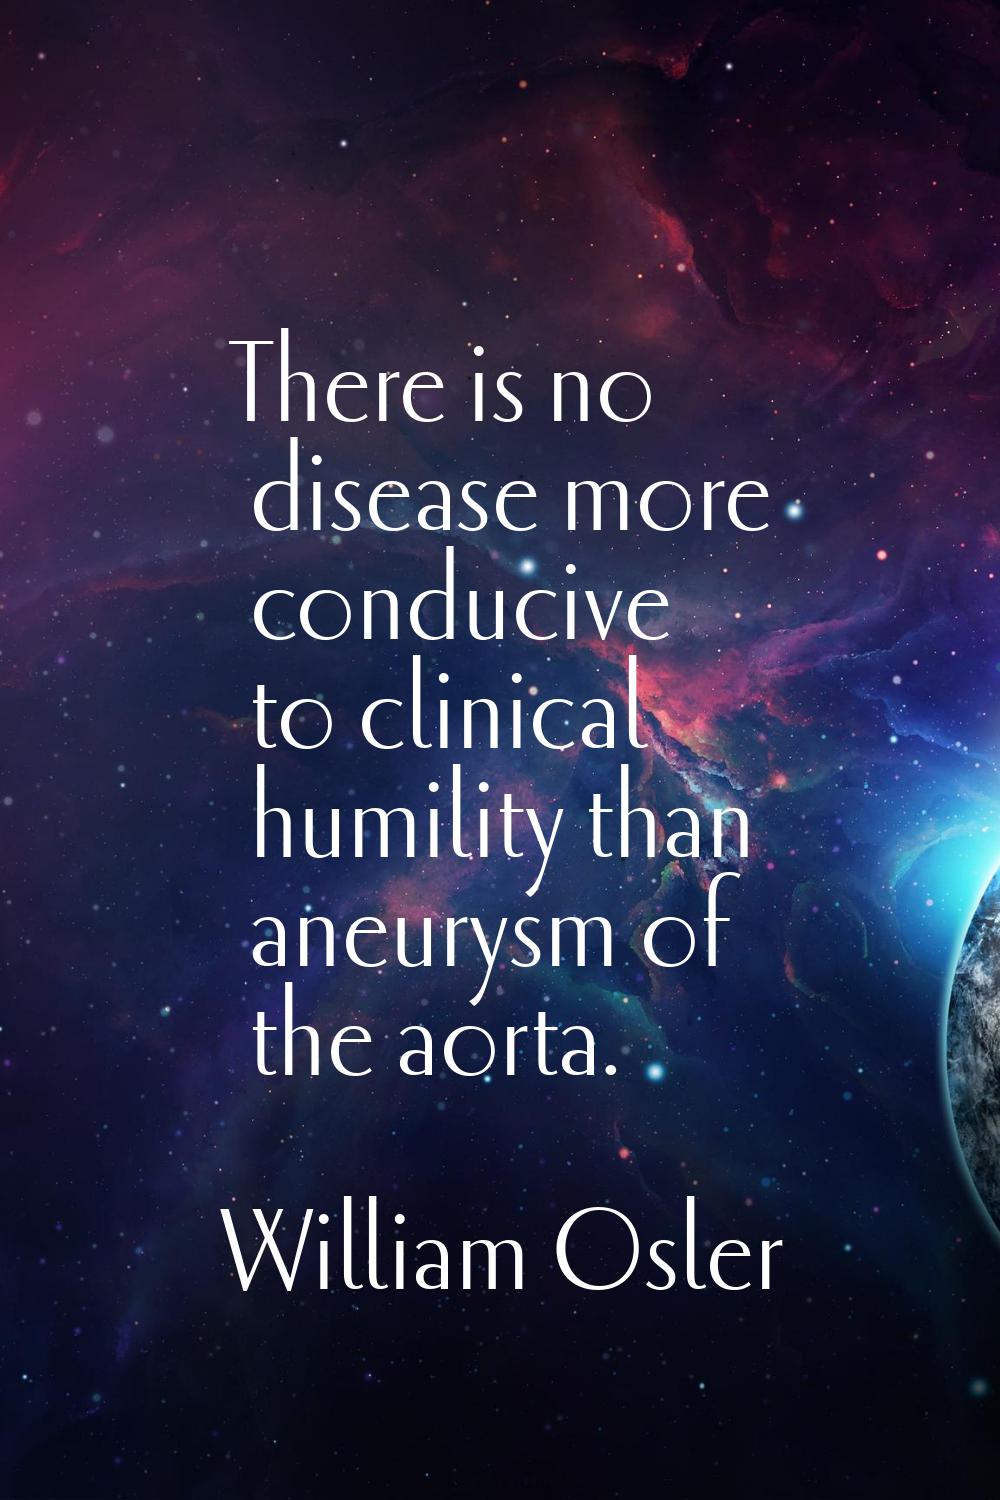 There is no disease more conducive to clinical humility than aneurysm of the aorta.